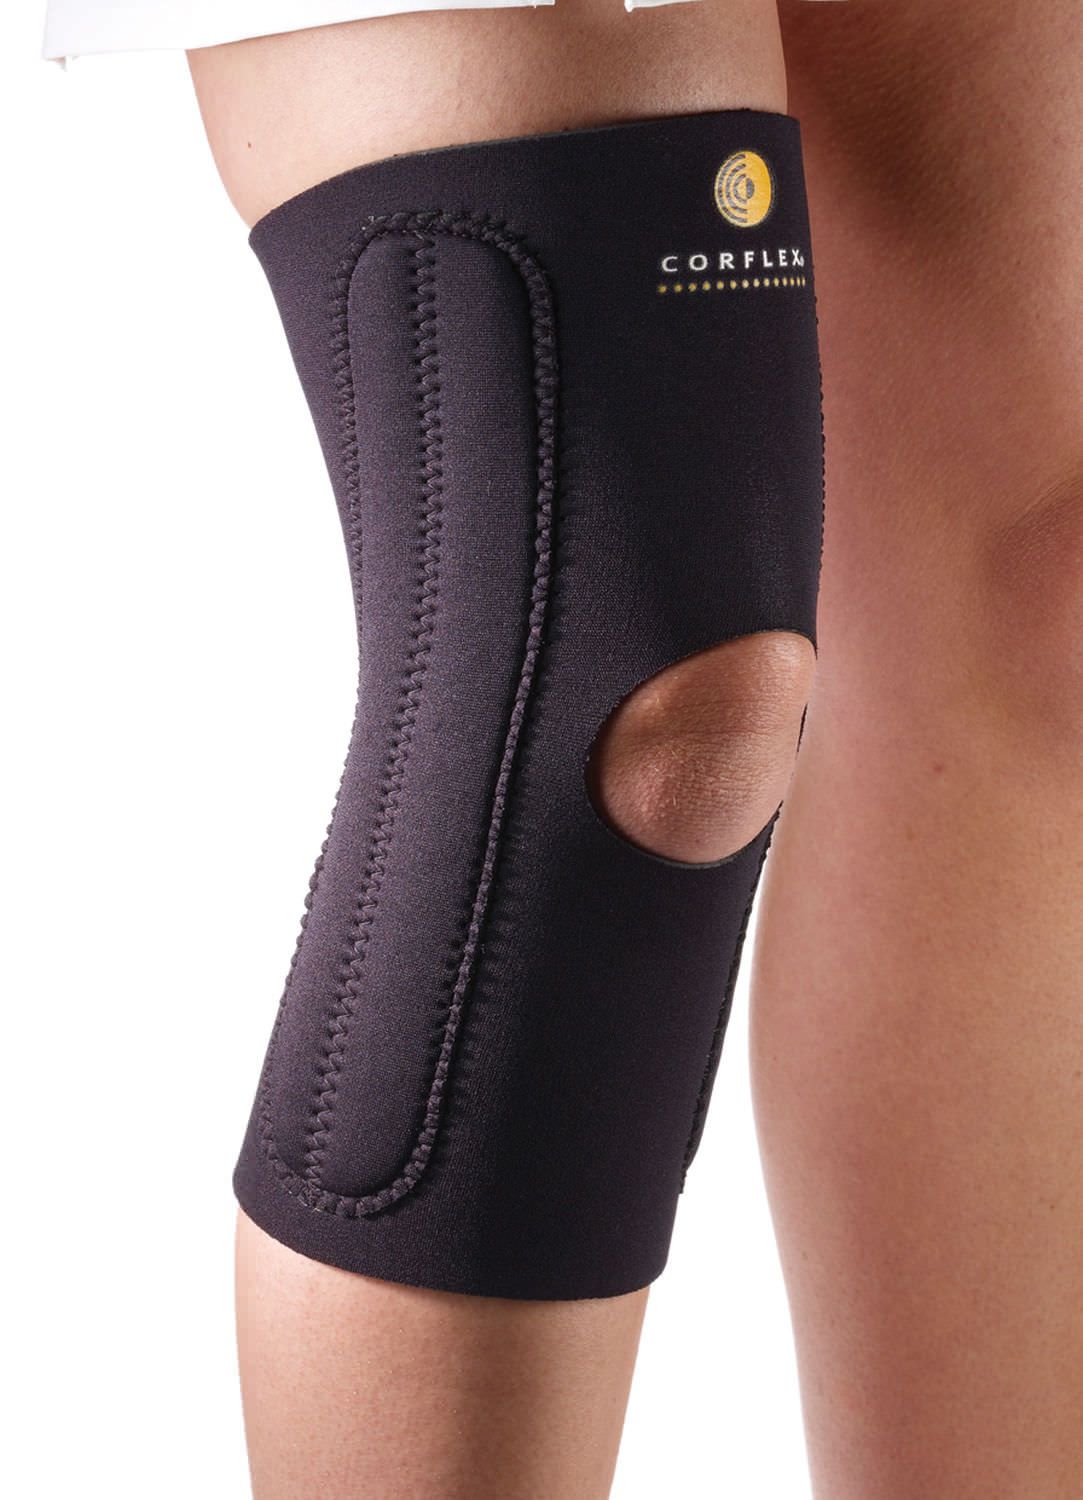 Knee sleeve (orthopedic immobilization) / with flexible stays / open knee 88-0065 Corflex